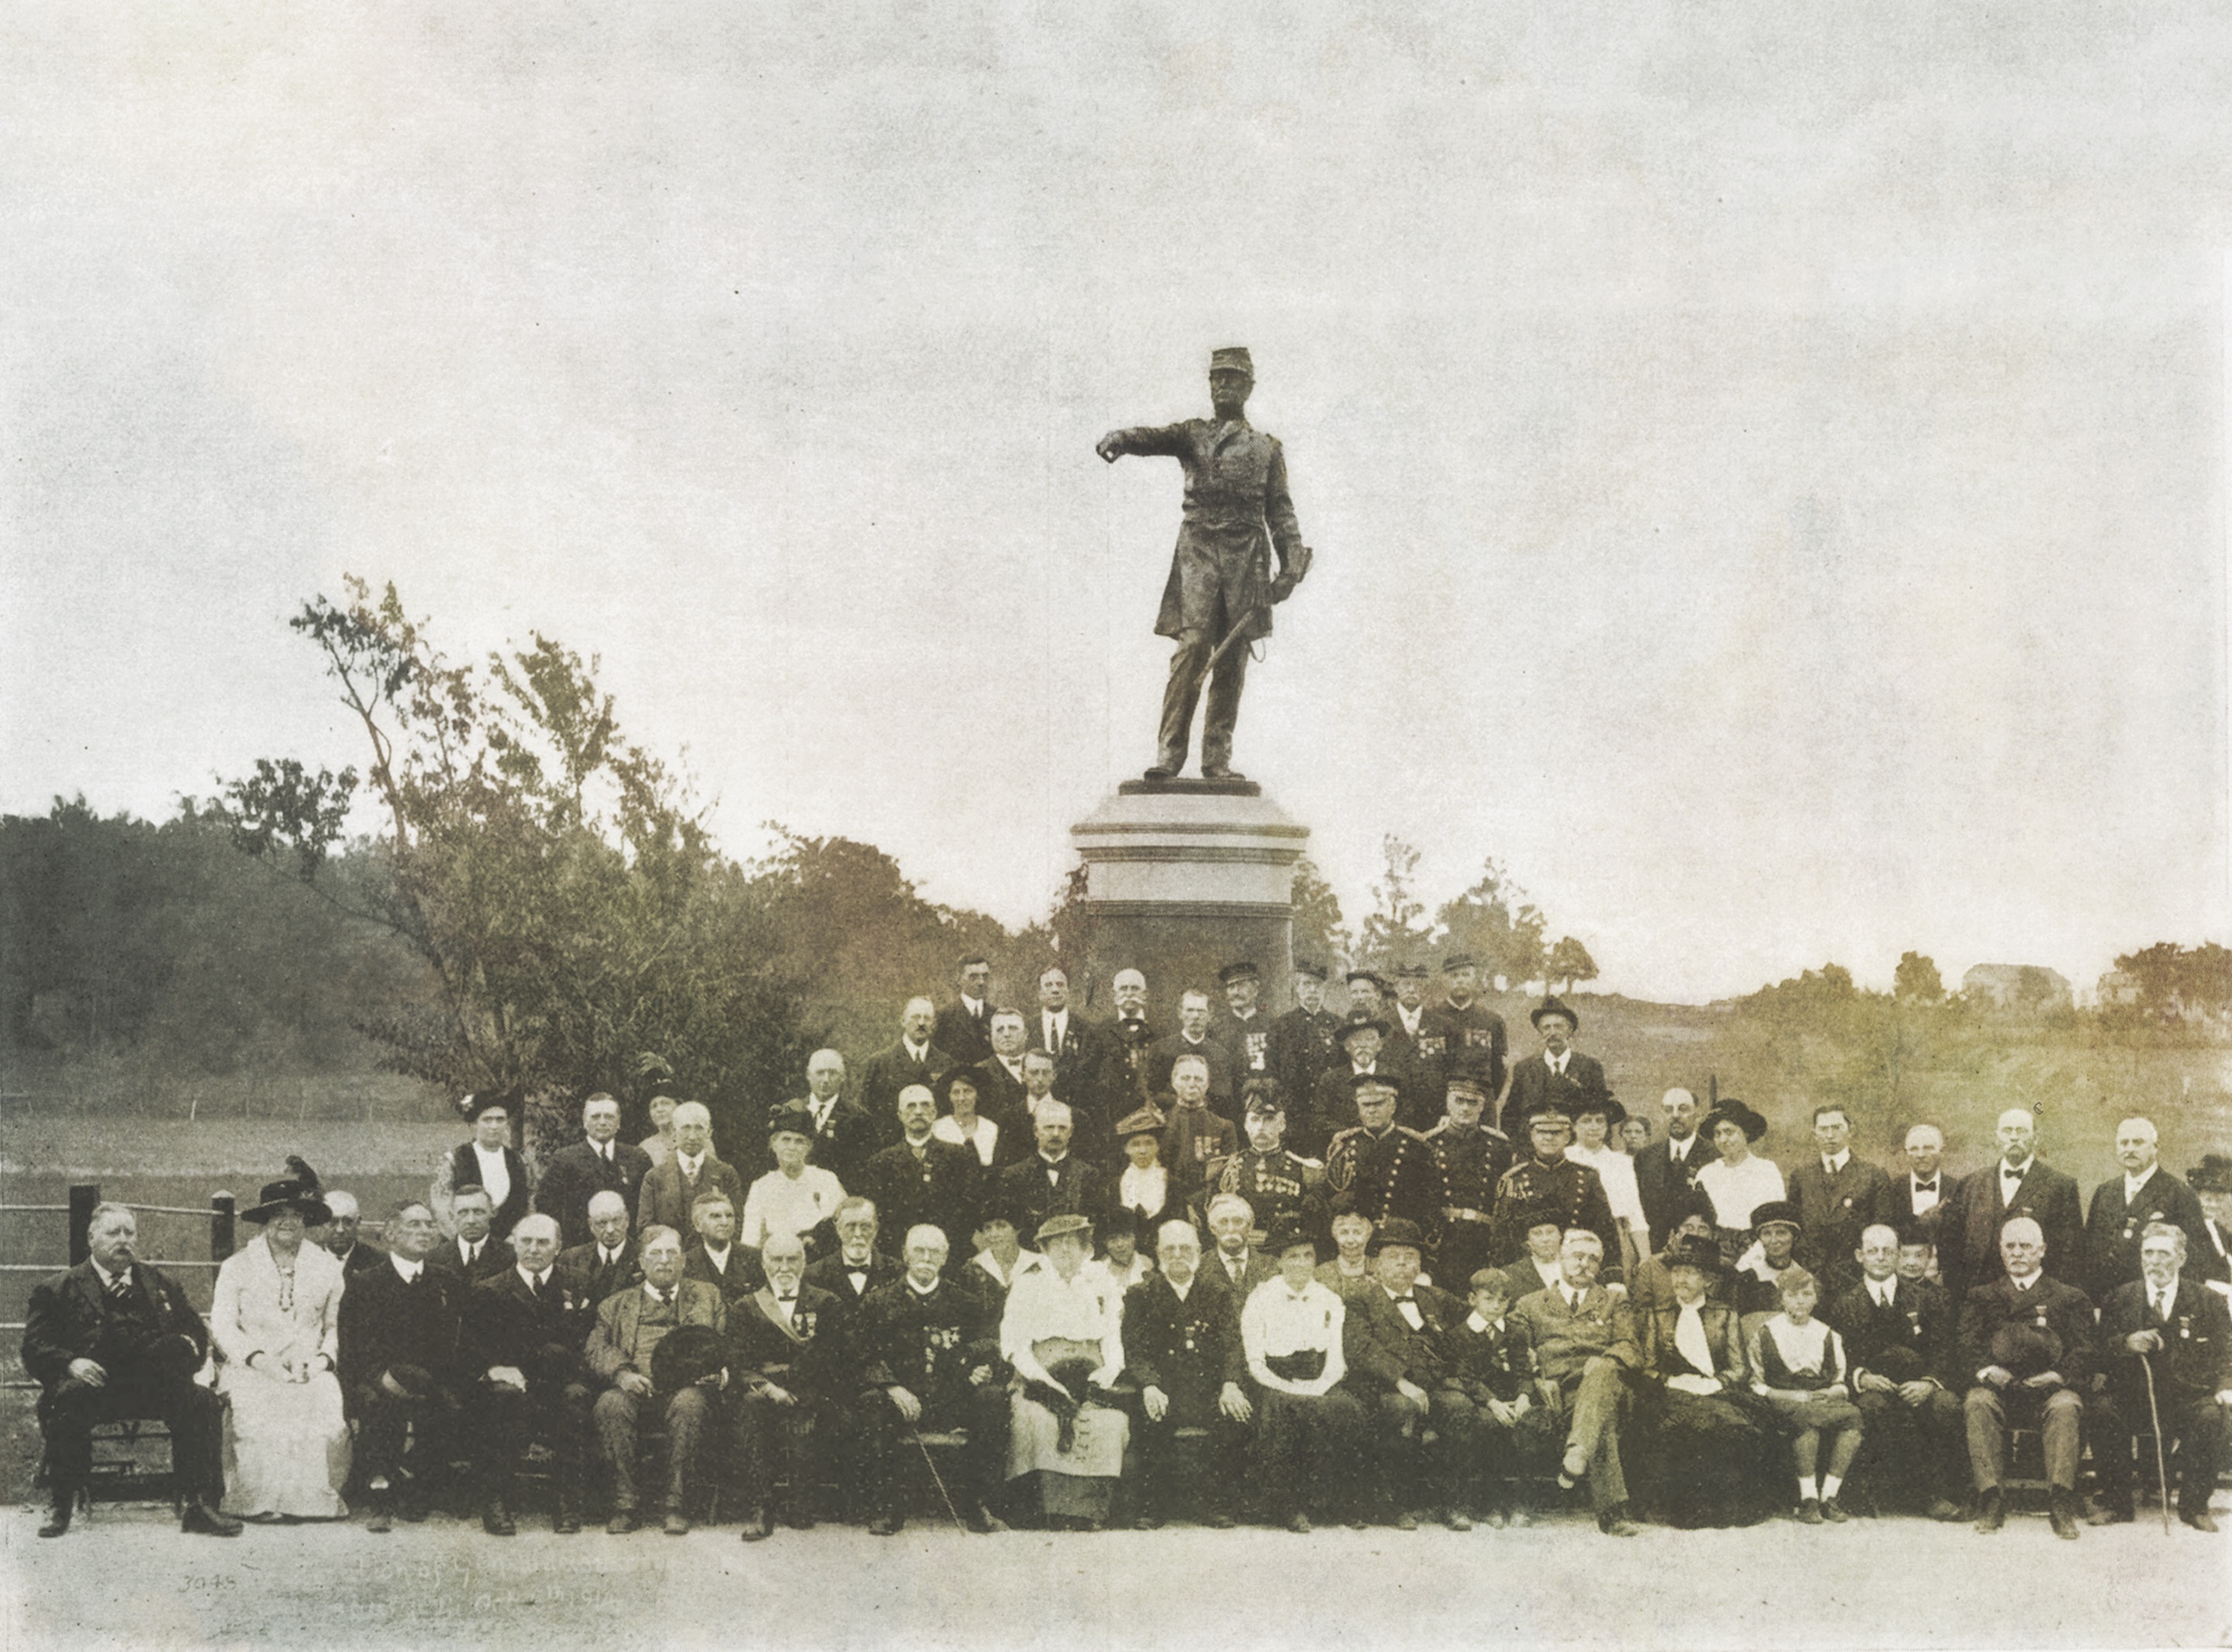 Dedication of this grand monument to Wadsworth at Gettysburg National Military Park, near where his 1st Corps division was engaged during the fighting on July 1, 1863, took place in October 1914. (In Memoriam: James Samuel Wadsworth, 1807-1864)